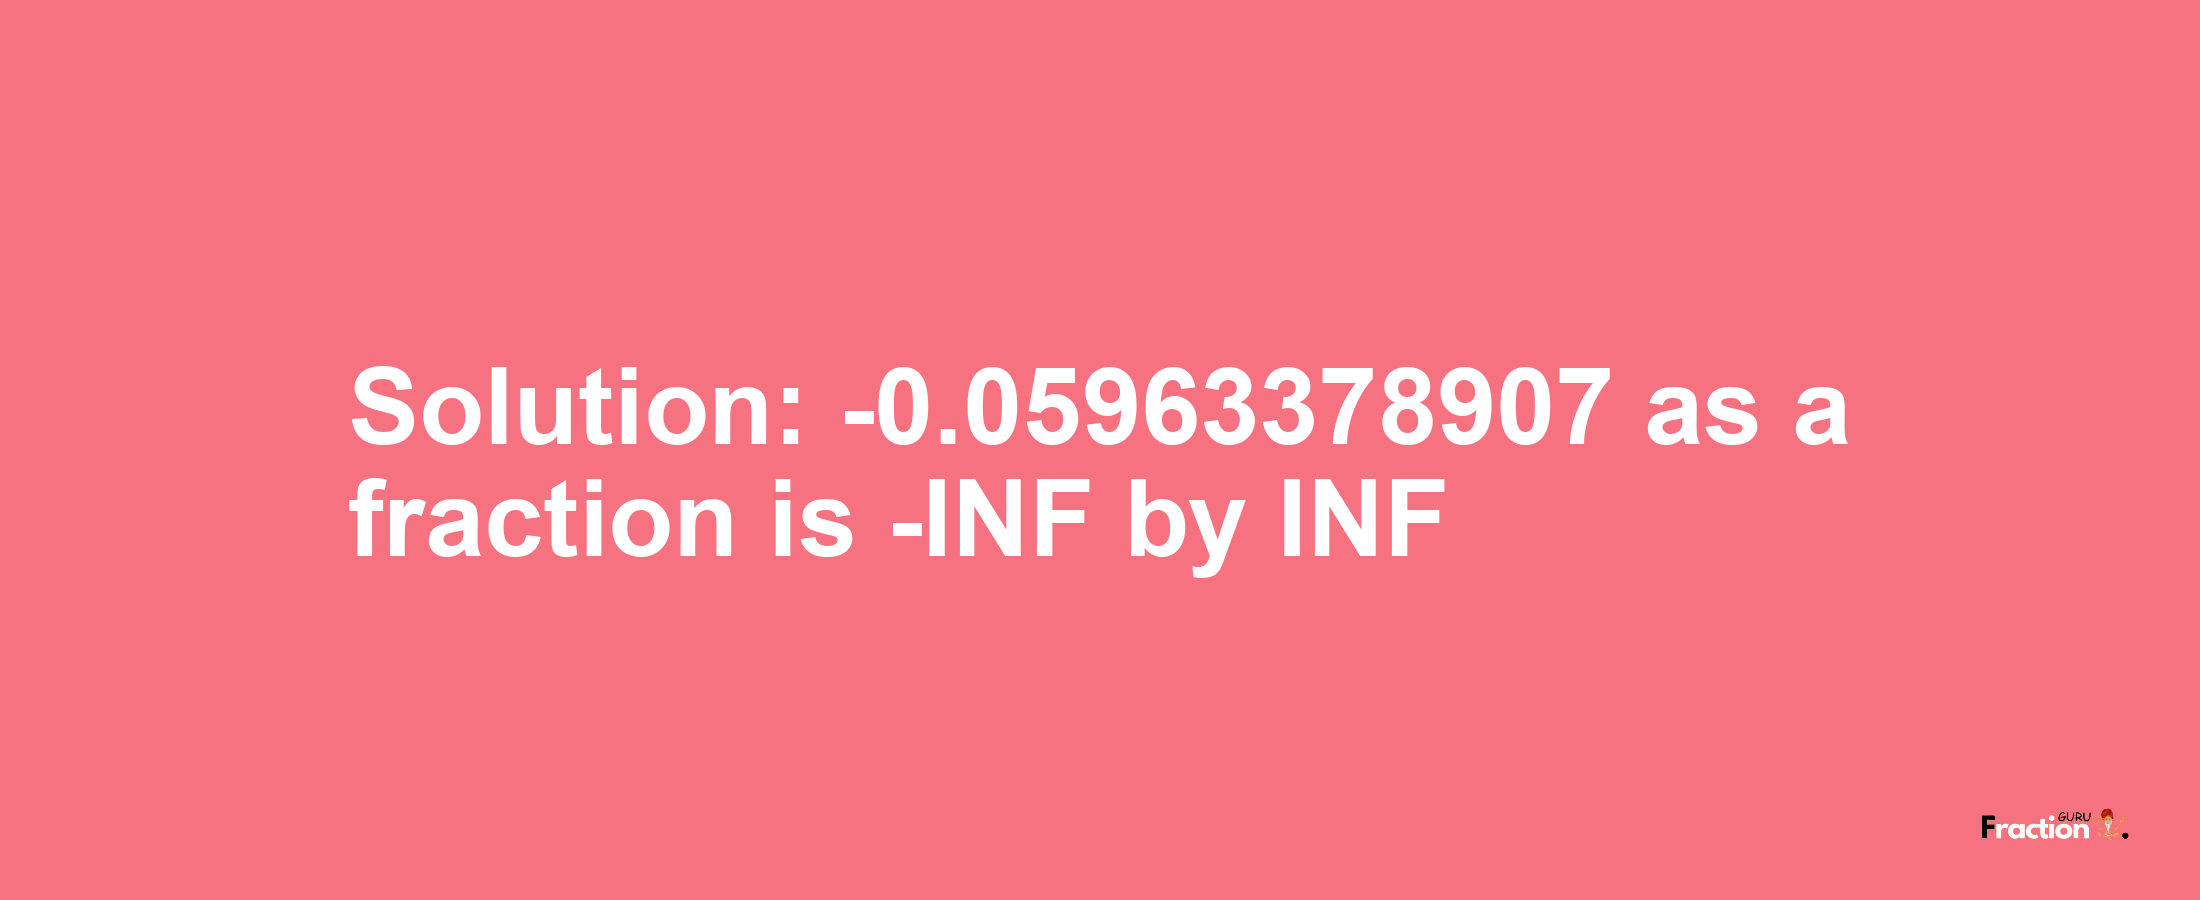 Solution:-0.05963378907 as a fraction is -INF/INF